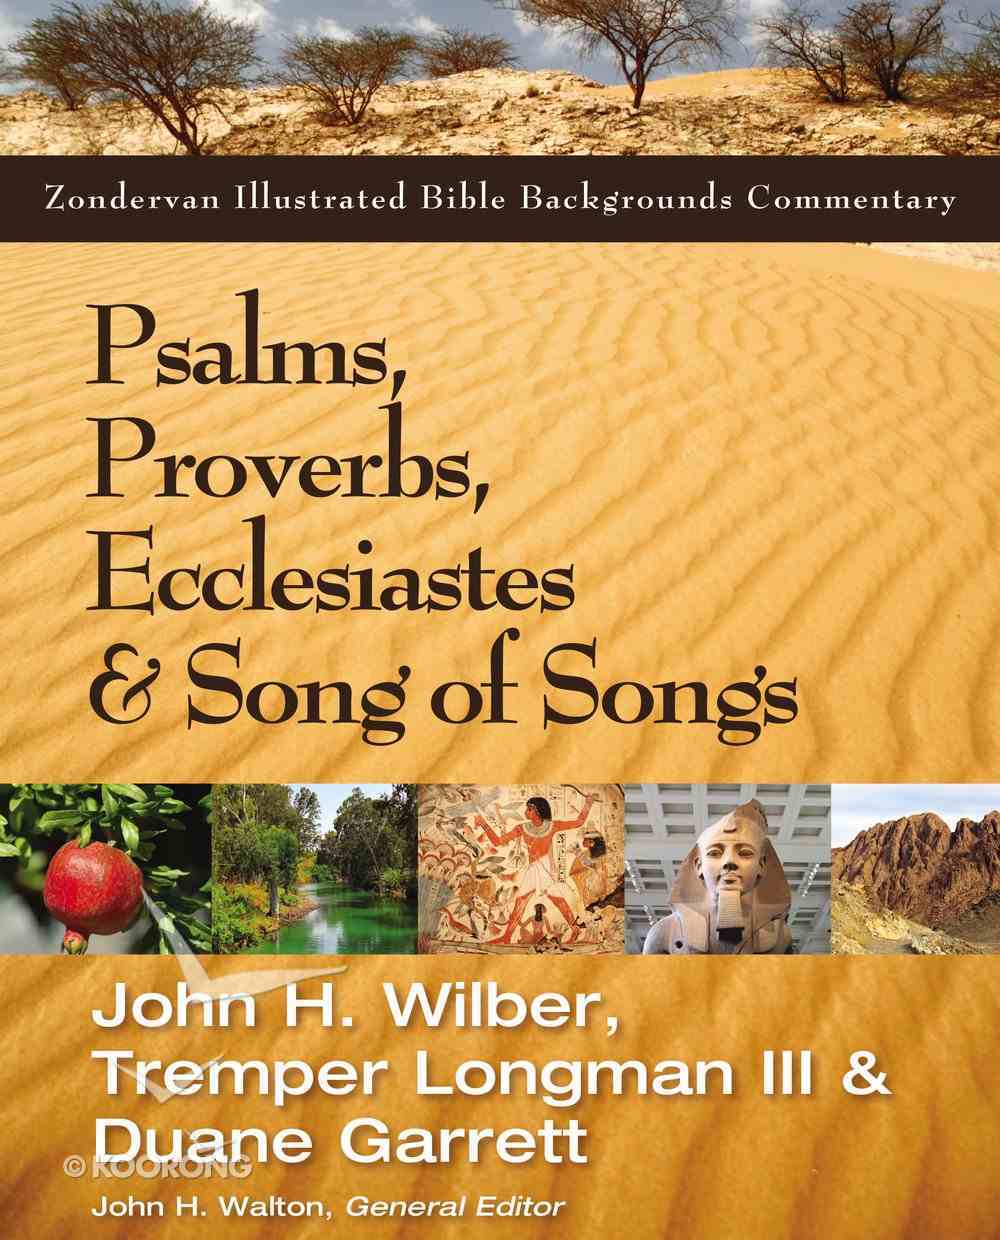 Psalms, Proverbs, Ecclesiastes, & Song of Songs (Zondervan Illustrated Bible Backgrounds Commentary Series) eBook